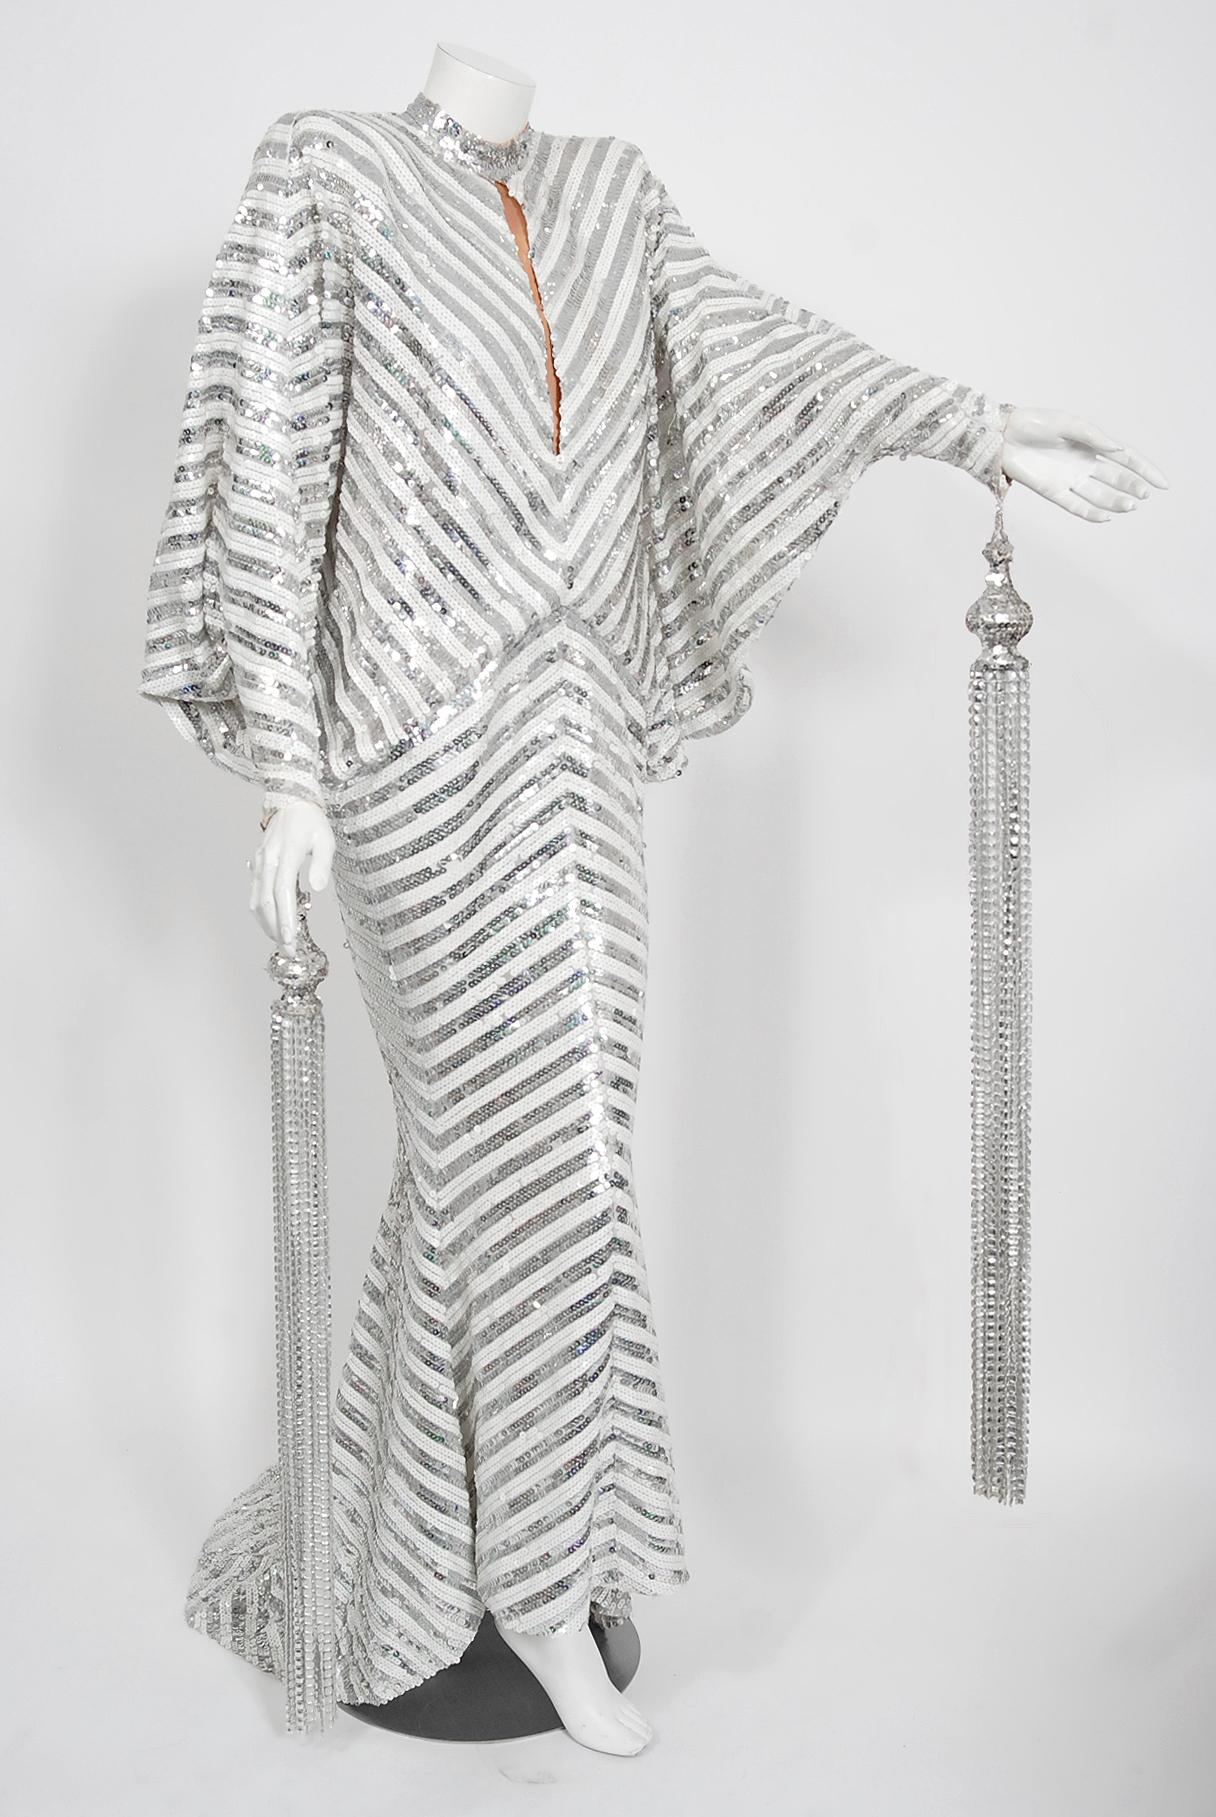 A breathtaking, museum quality Ret Turner couture gown custom made for the famous American icon, Diana Ross. Not only does this one-of-a-kind treasure come with official certificate of authenticity, we even found the design sketch for Diana Ross!